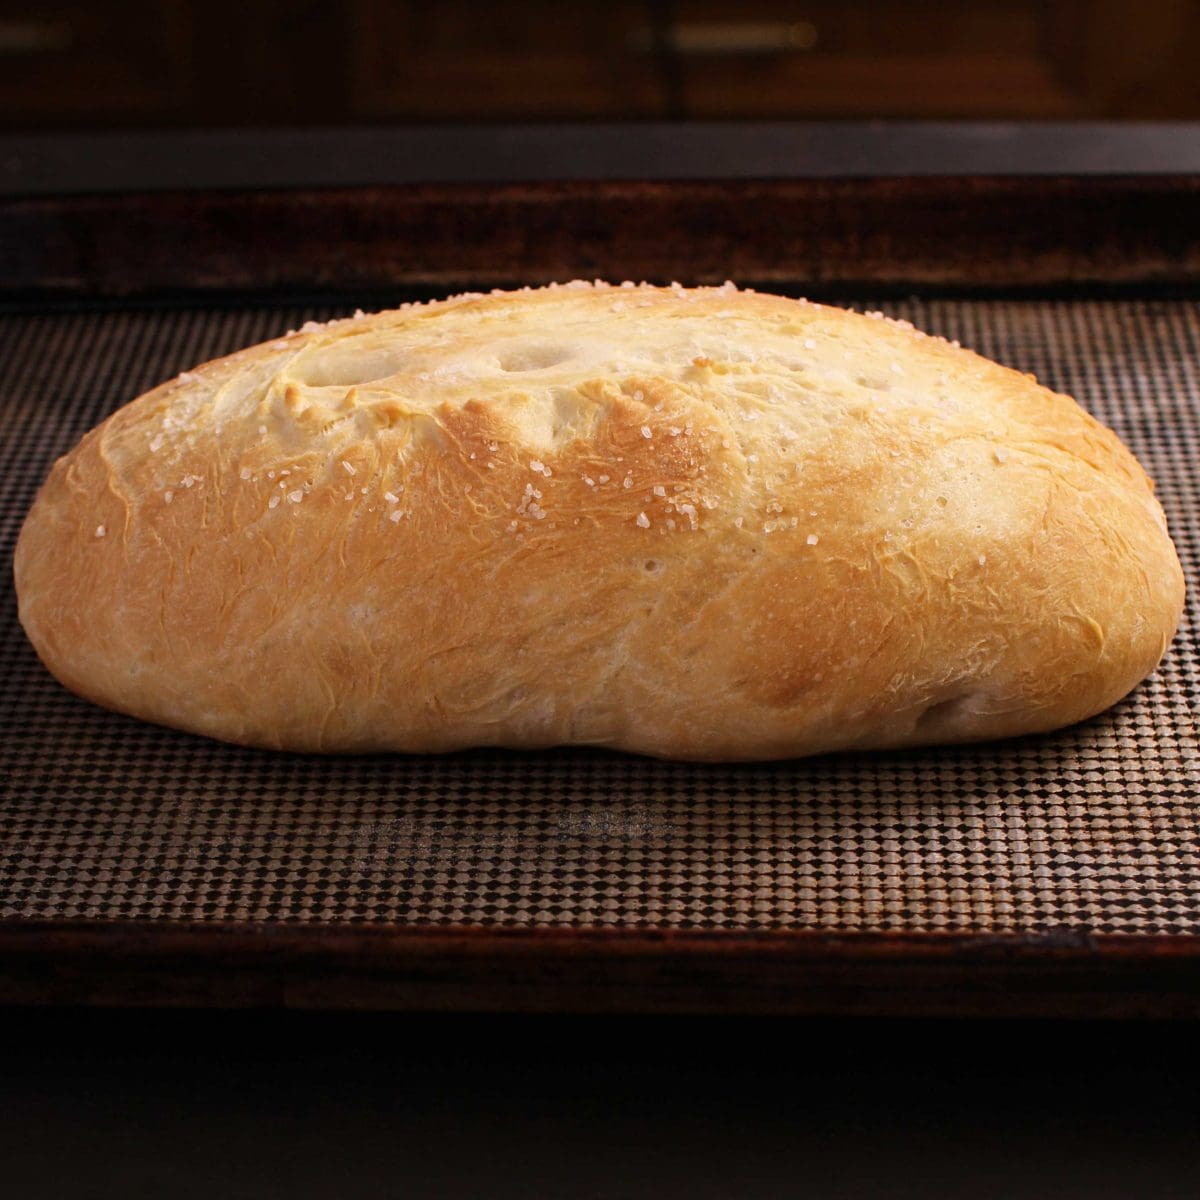 A loaf of baked french bread on a baking sheet.